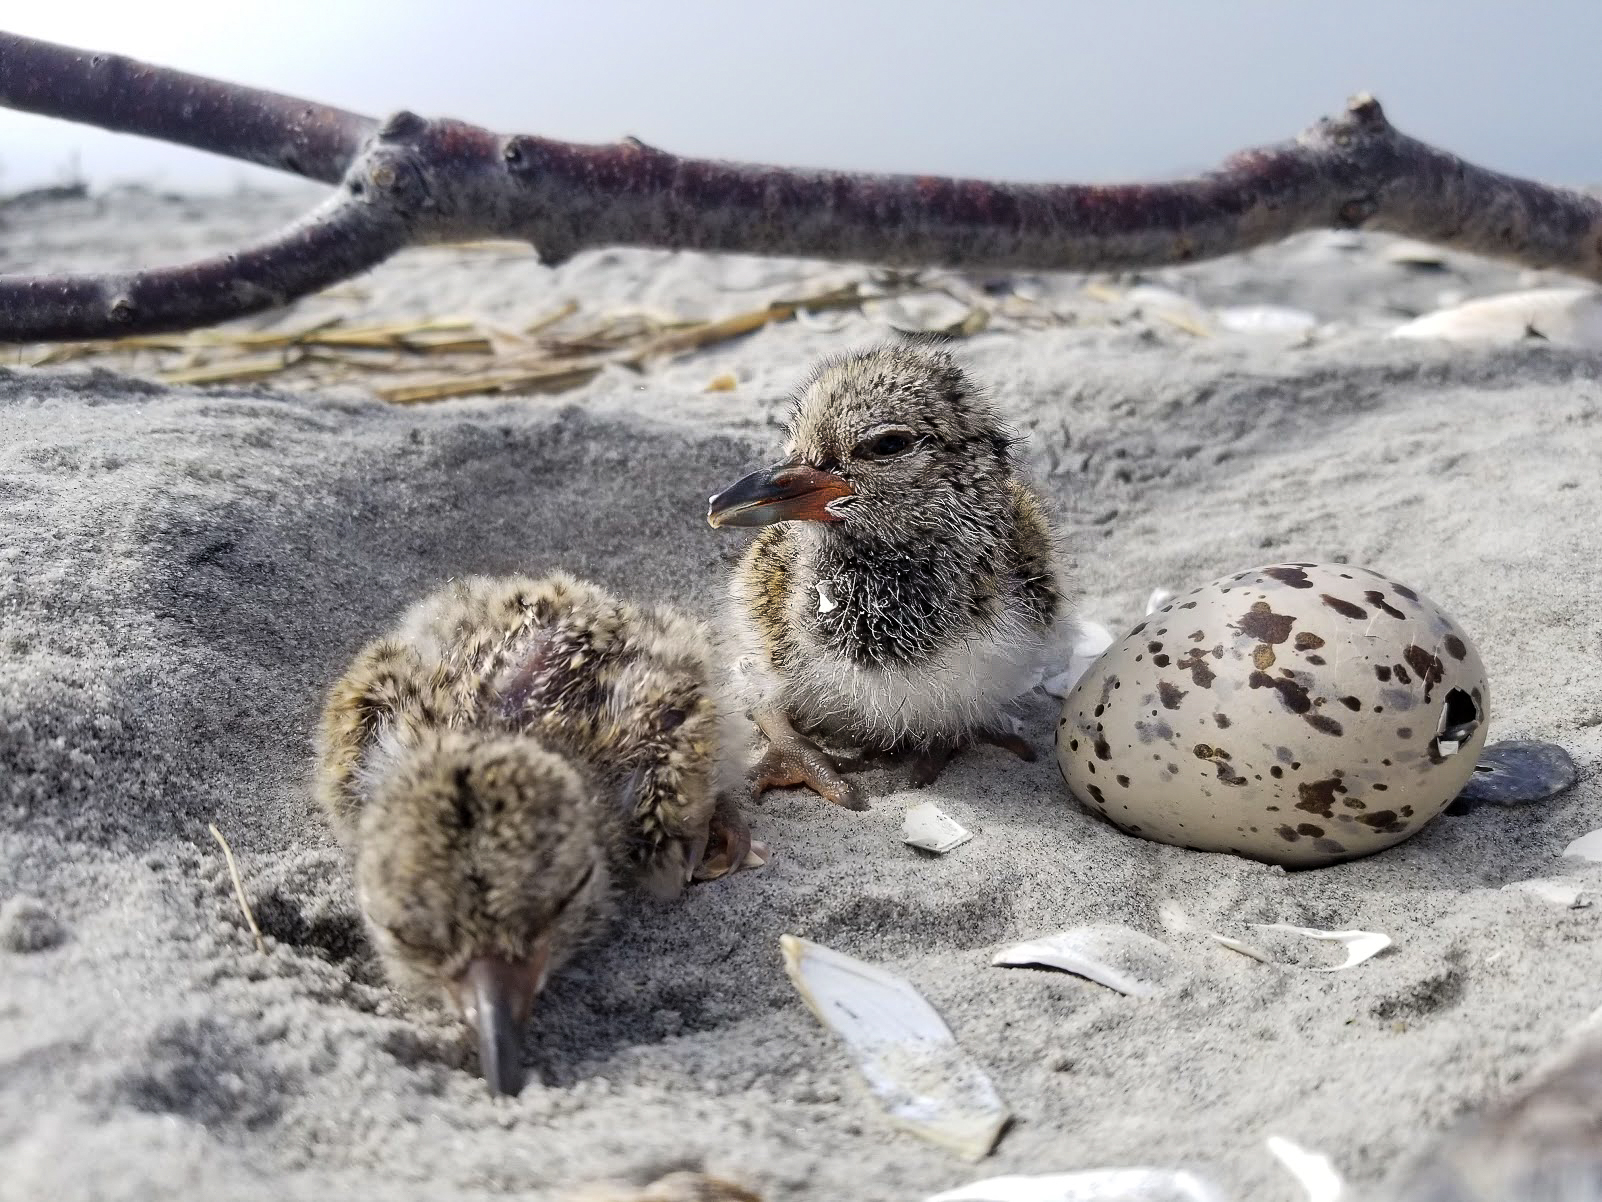 American oystercatcher chicks hatch from the nest